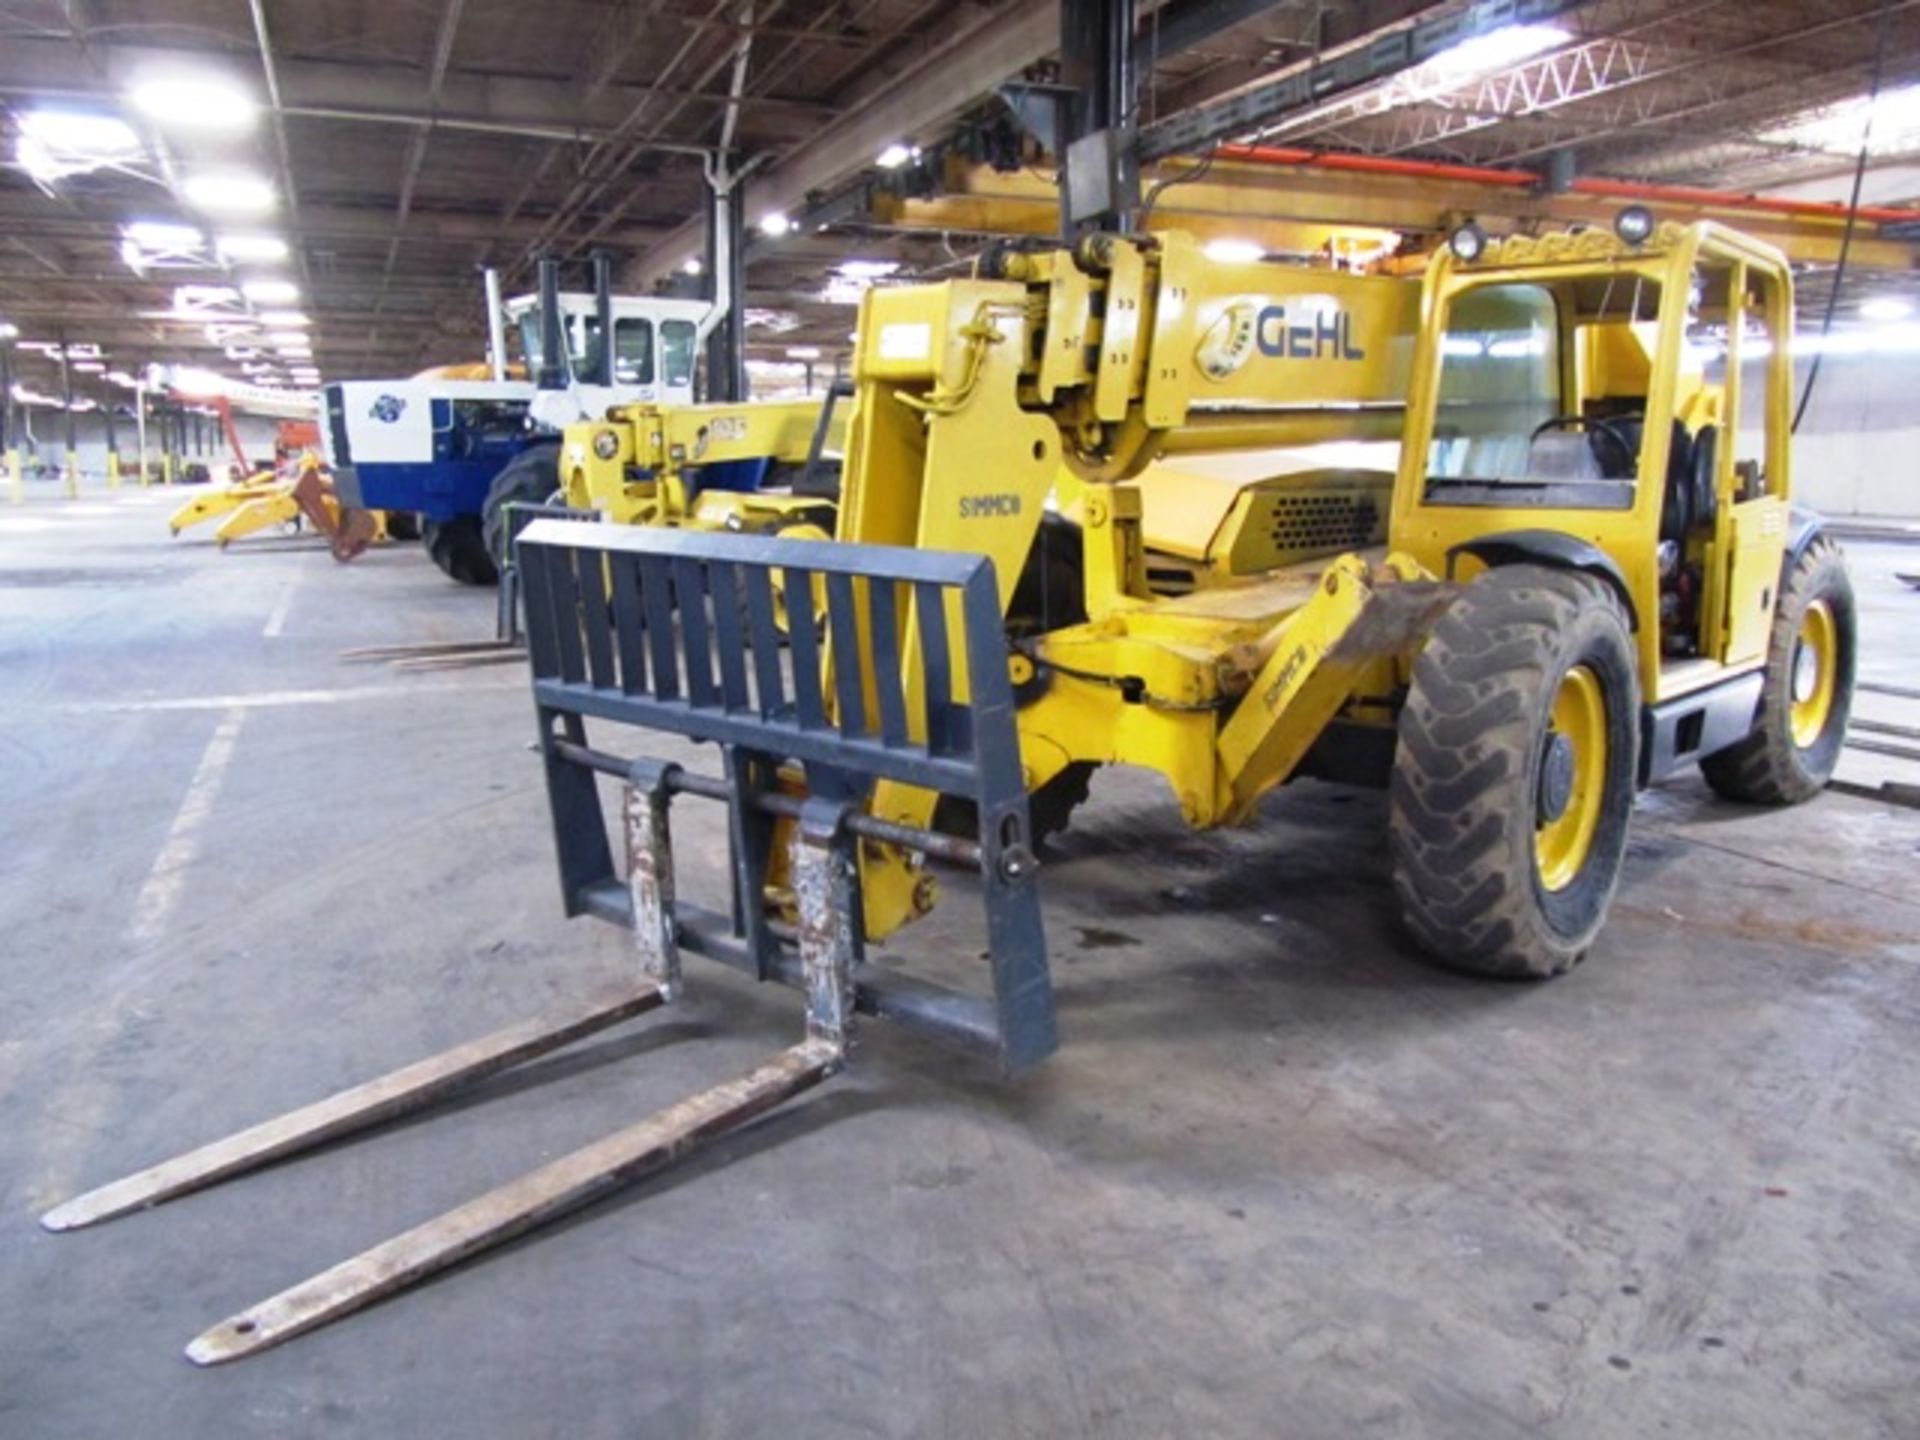 Gehl DL-10H / 55 Telehandler Telescopic Boom Forklift with 40' Max Boom Reach, 5' Forks, Approx 4205